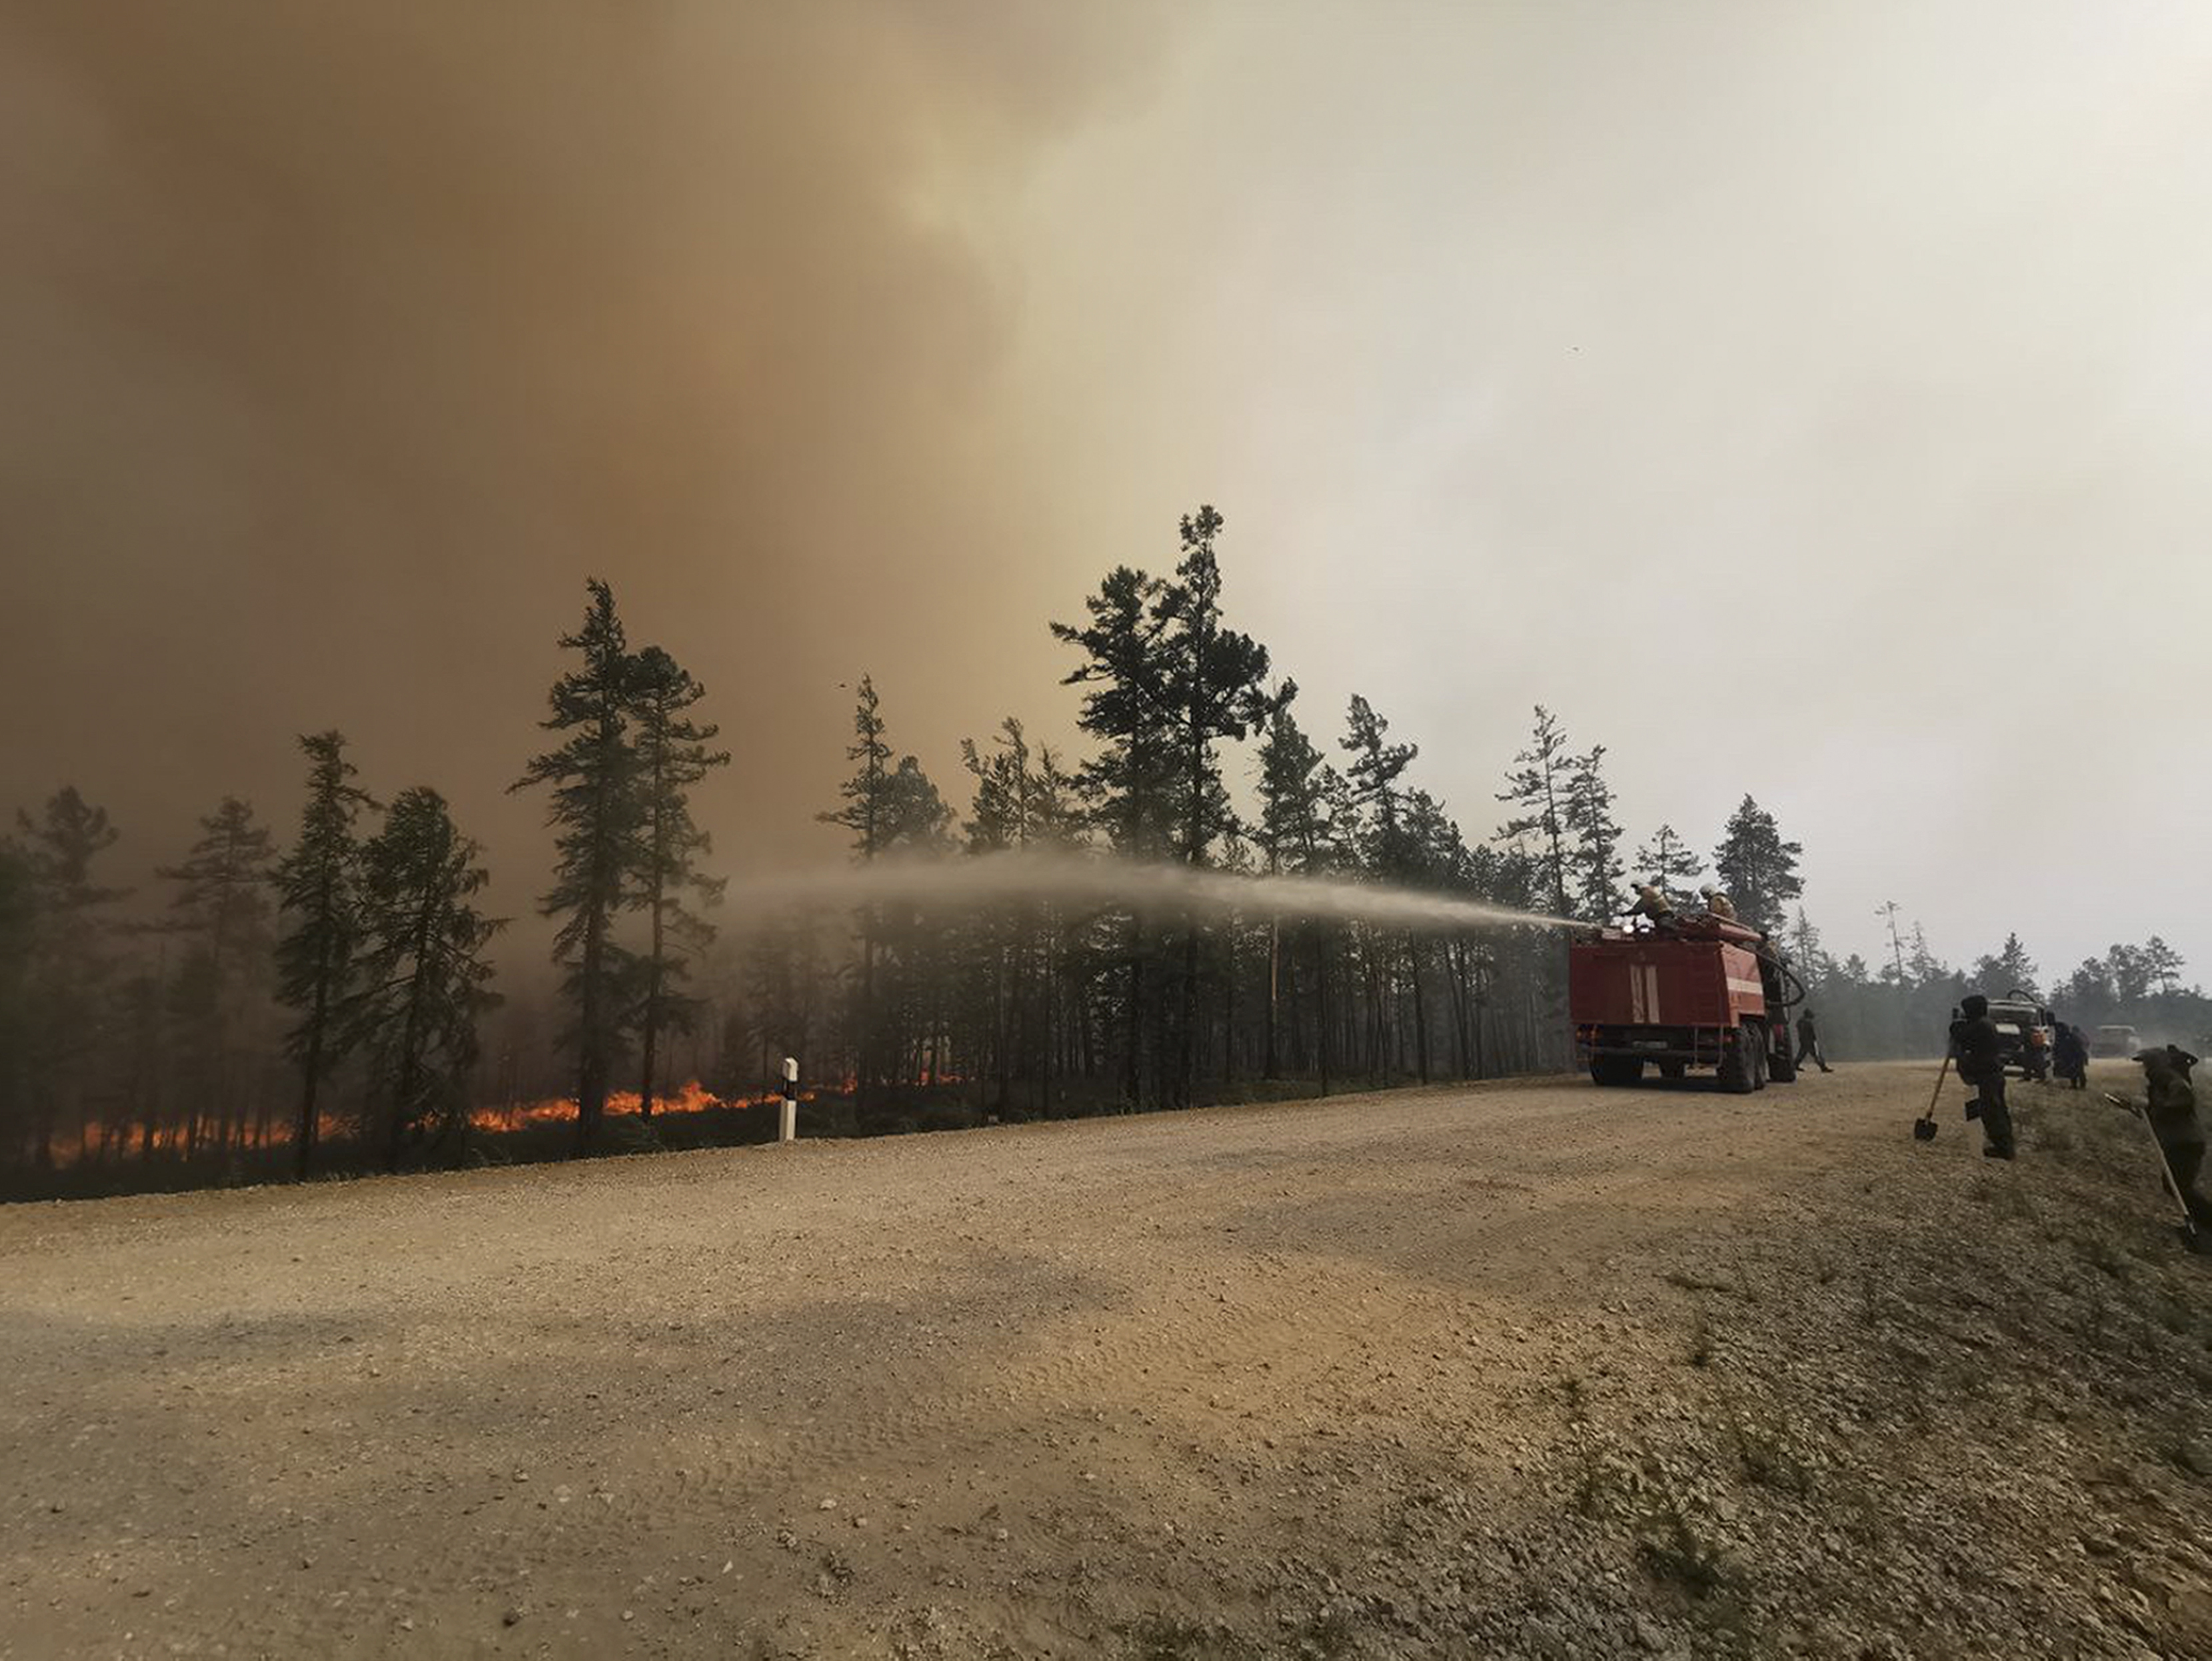 Firefighters work at the scene of a forest fire in Russia